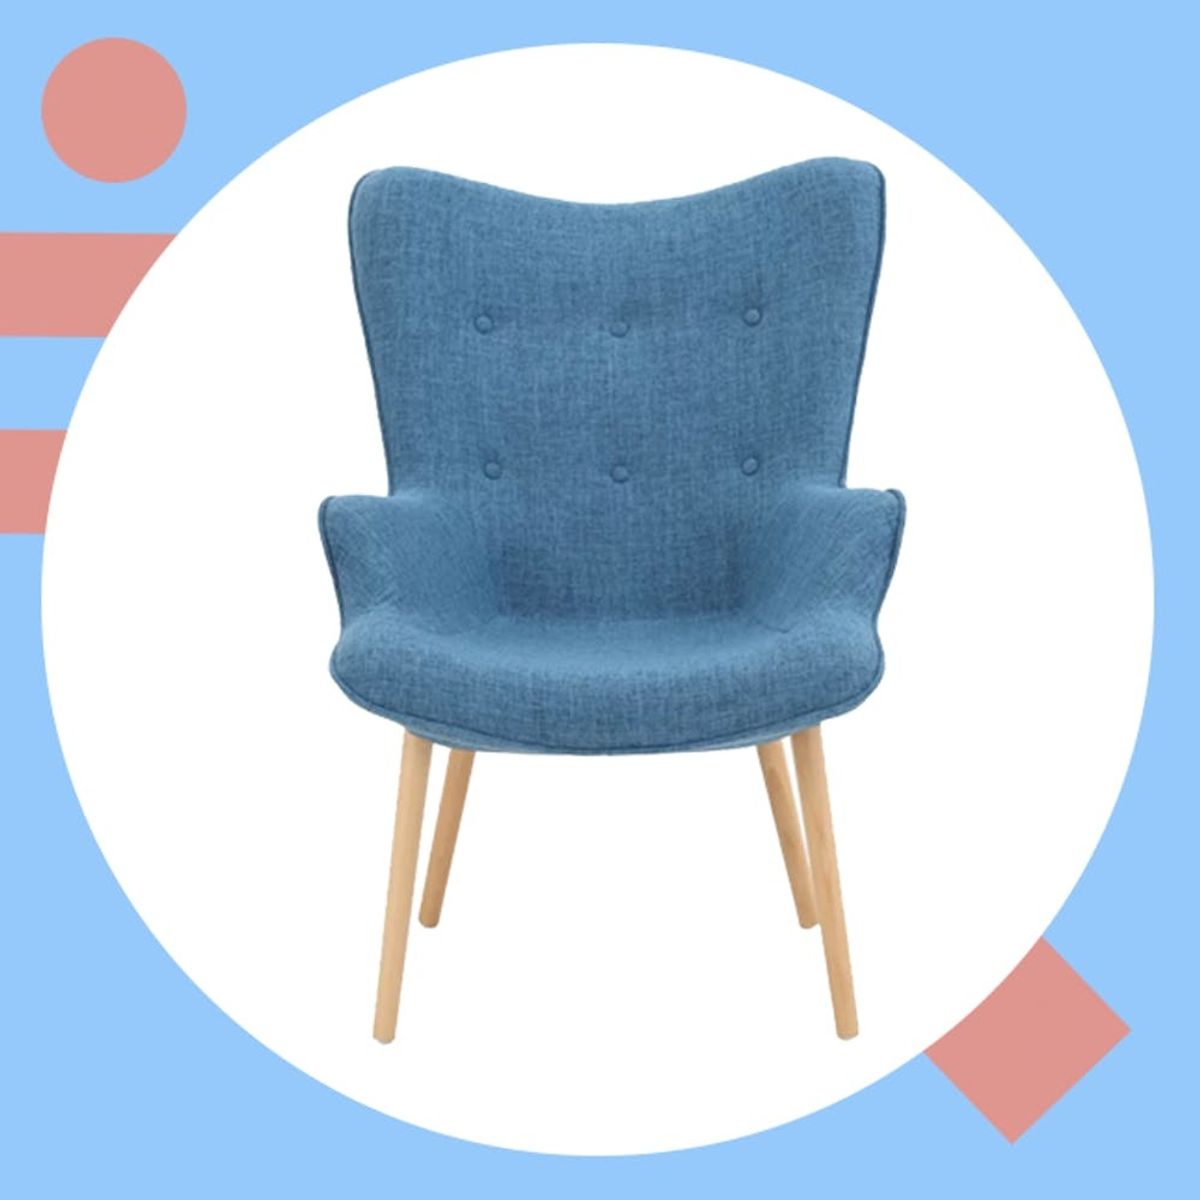 The 2018 Seating Trend We Can’t Wait to Sink Into